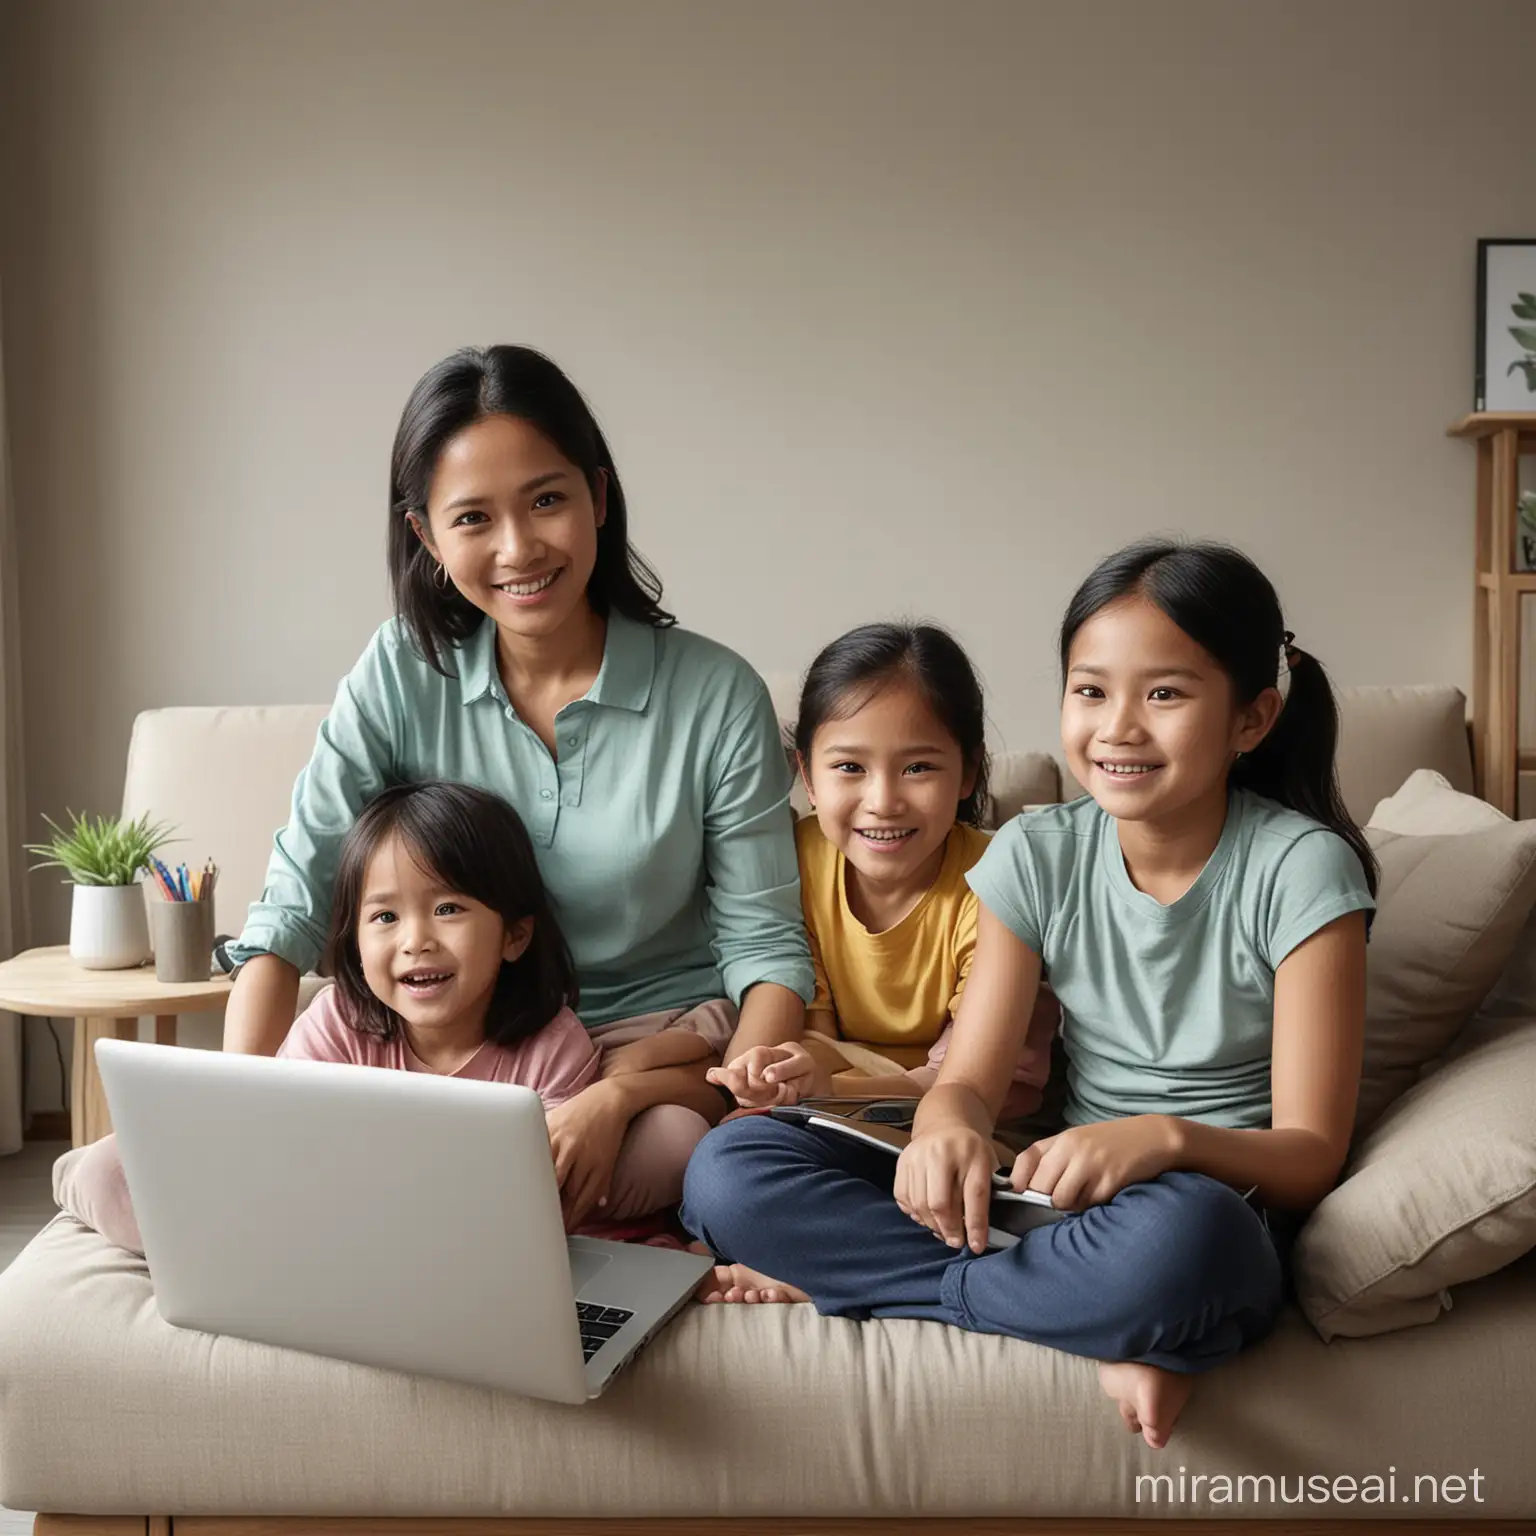 create realistic HD image, indonesian mother with 2 kids in living room, mother is doing online business with her laptop, children are studying on the back ground sitting on the couch using their HP

